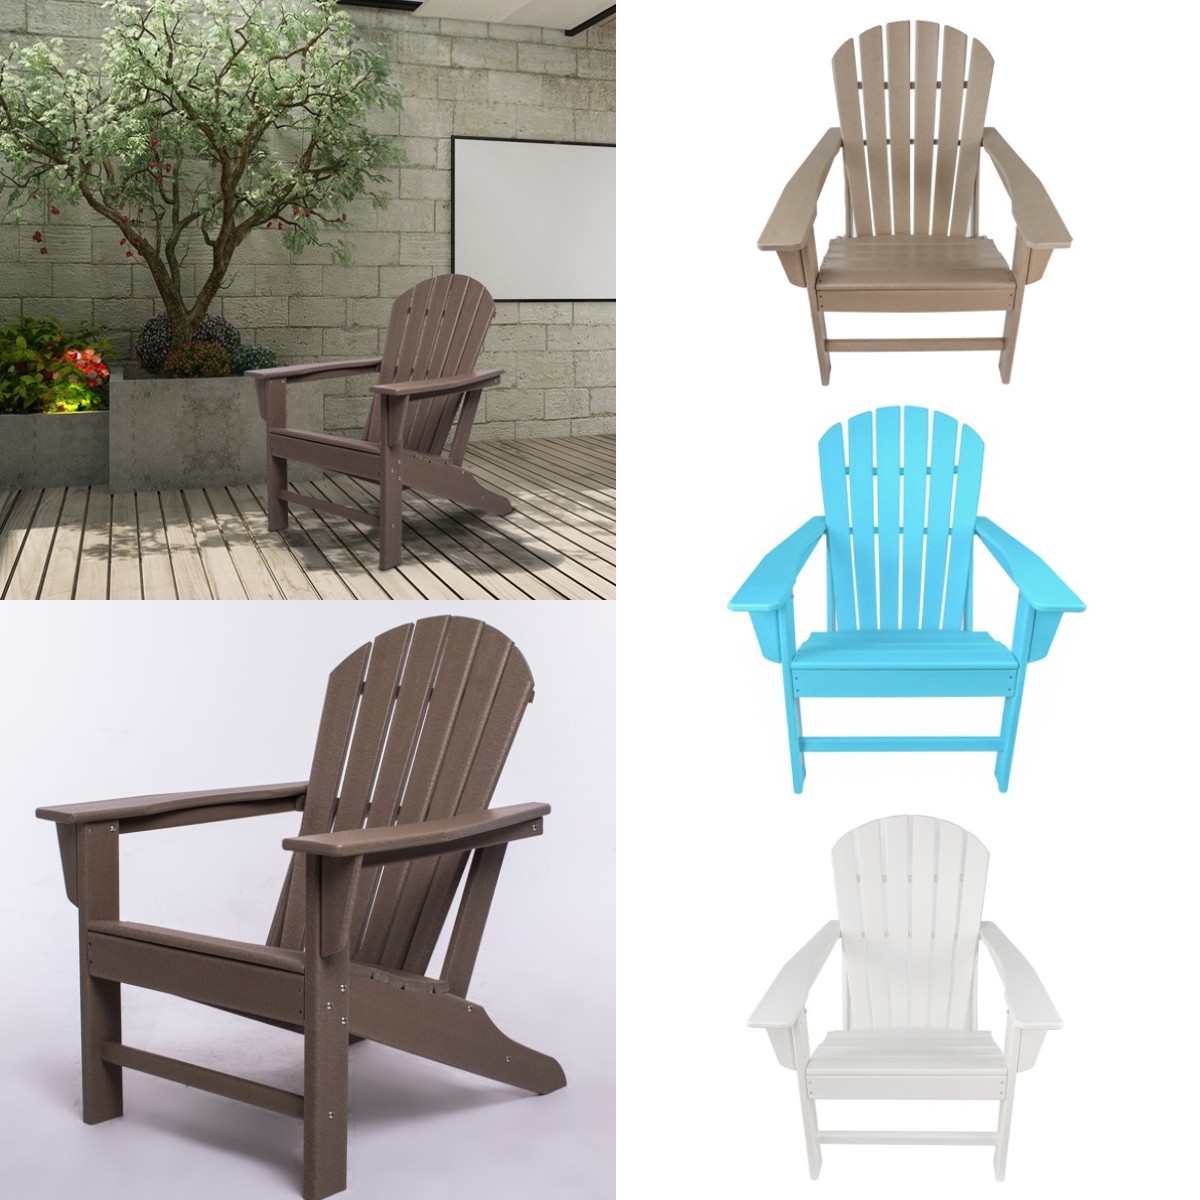 Adirondack Chair Resin, 350 lbs Capacity Load,Patio Chair Lawn Chair Outdoor Adirondack Chairs Weather Resistant for Patio Deck Garden 33.07*31.1*36.4" HDPE Resin Wood,Dark Brown - image 4 of 8